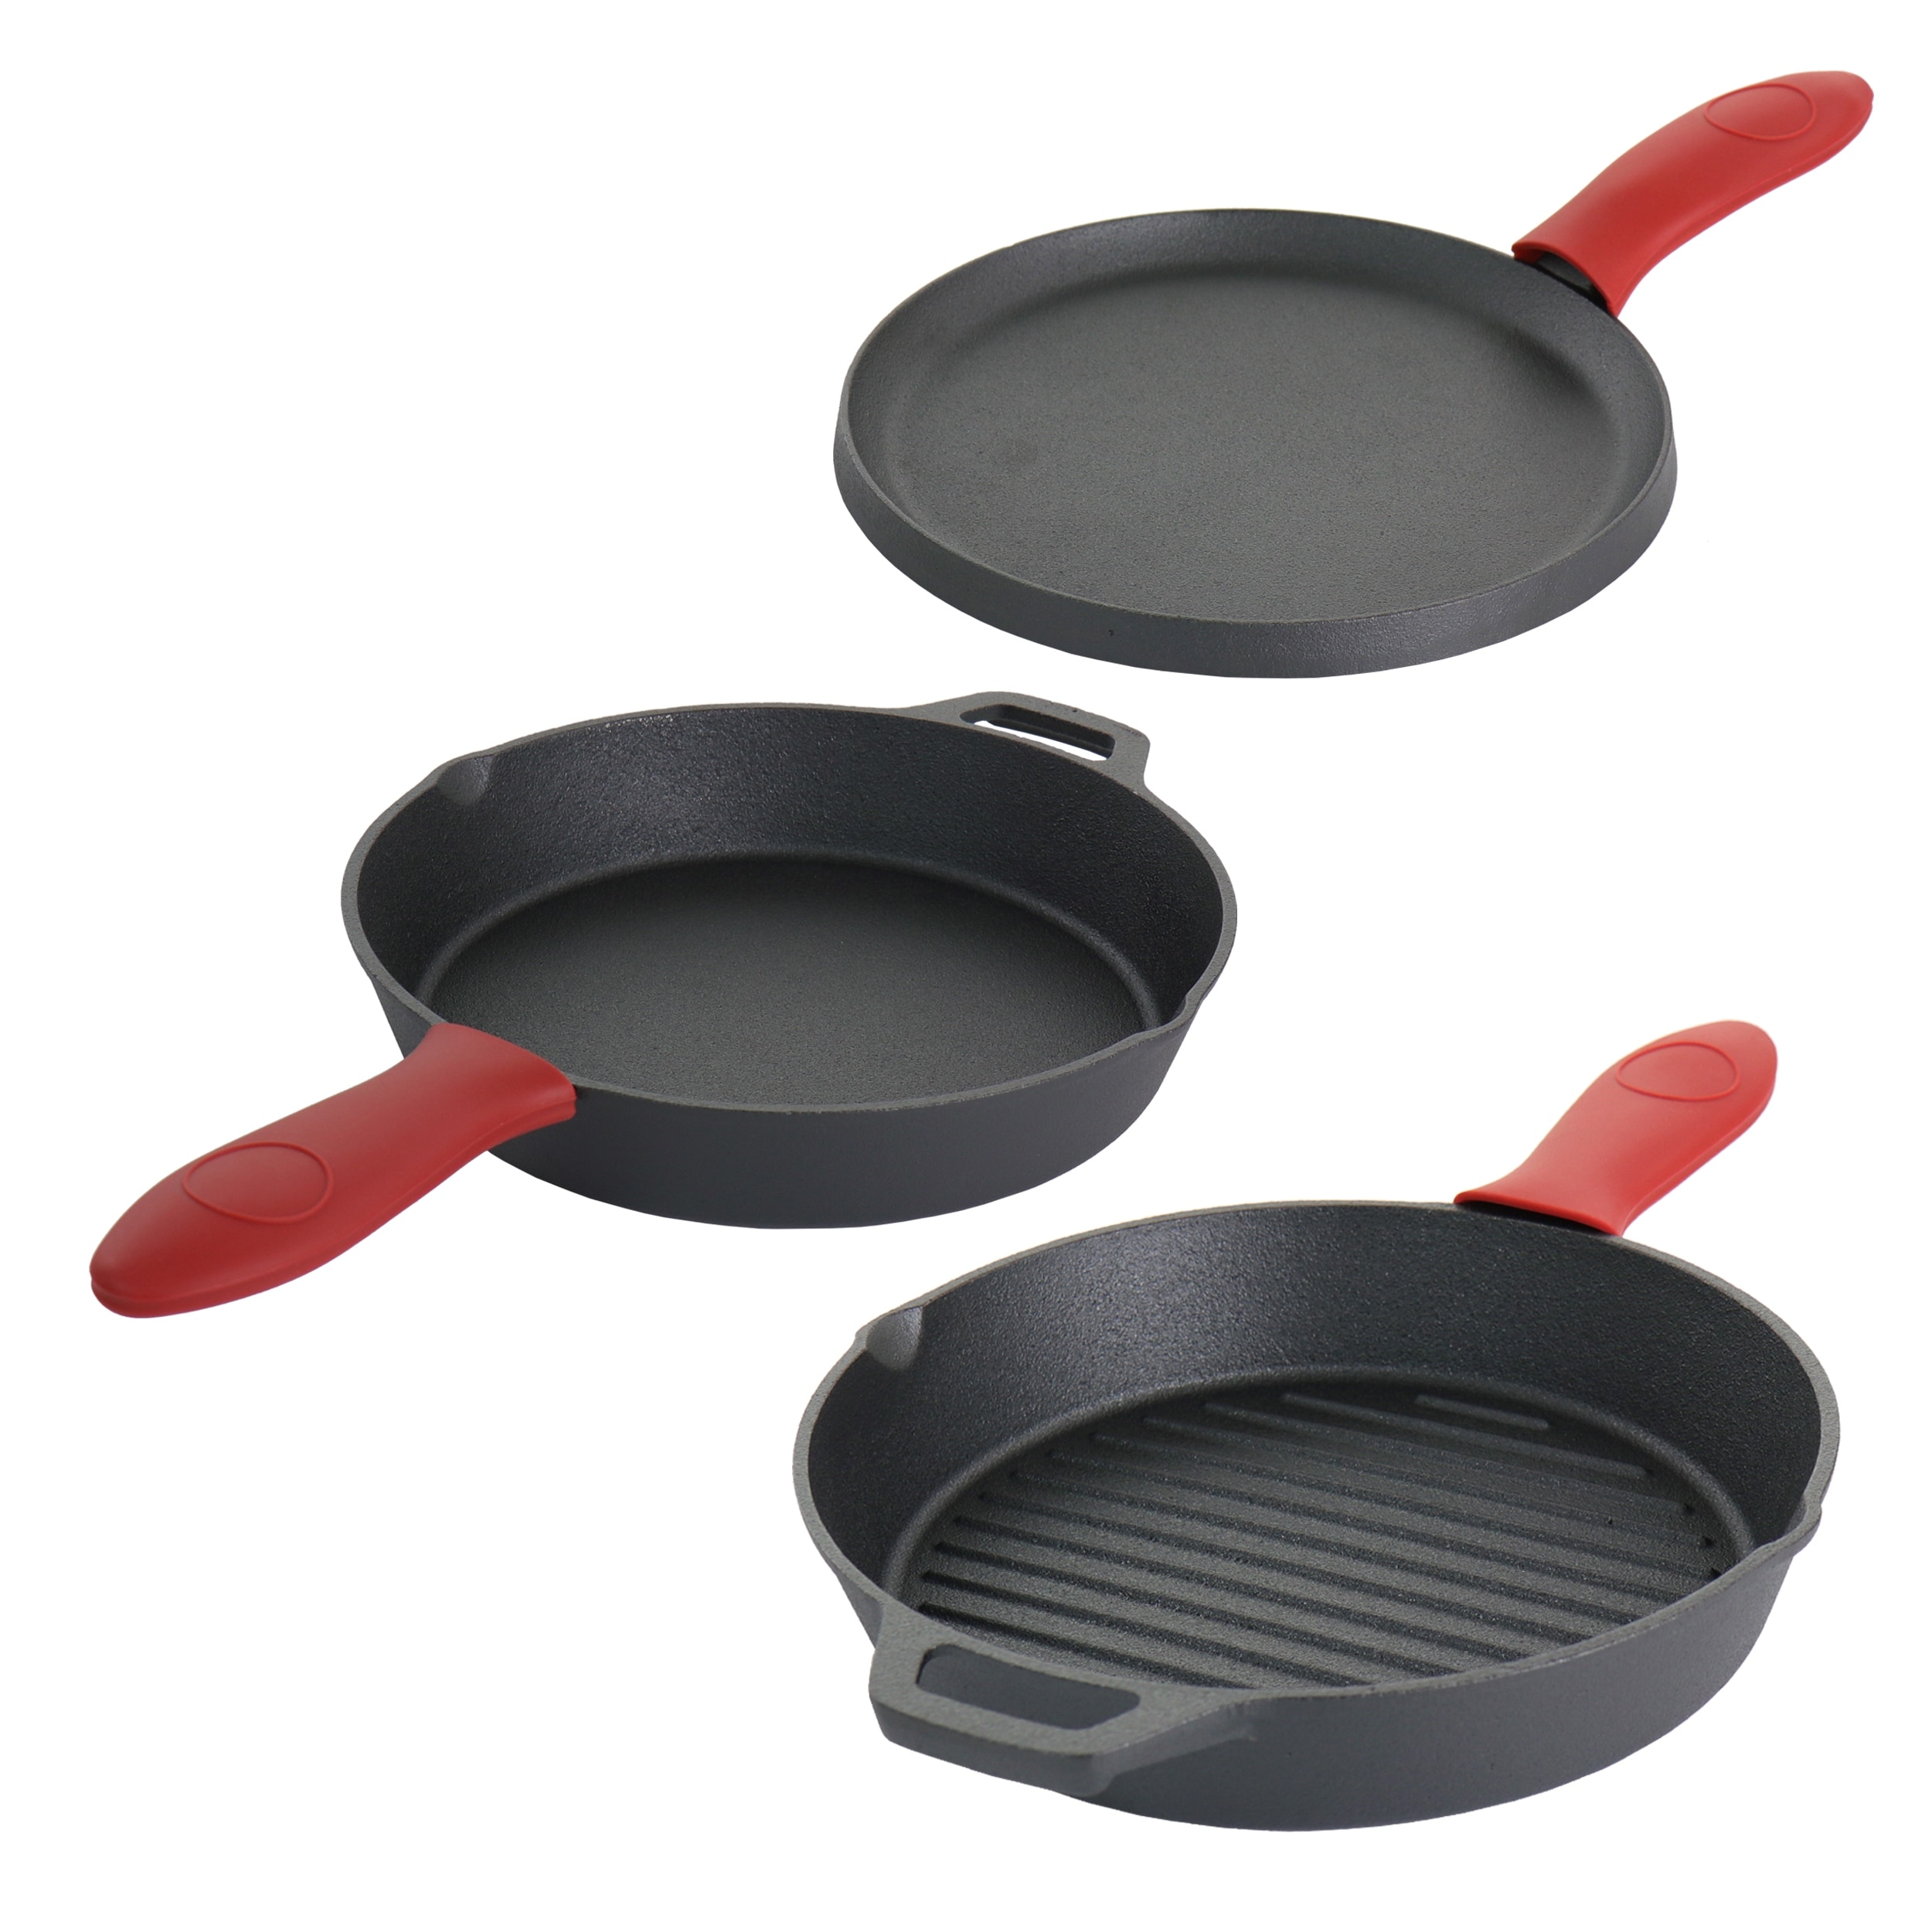 https://ak1.ostkcdn.com/images/products/is/images/direct/9b135aa754cd321709102071c88c832ef4af156b/MegaChef-Pre-Seasoned-Cast-Iron-6-Piece-Set-with-Red-Silicone-Holders.jpg